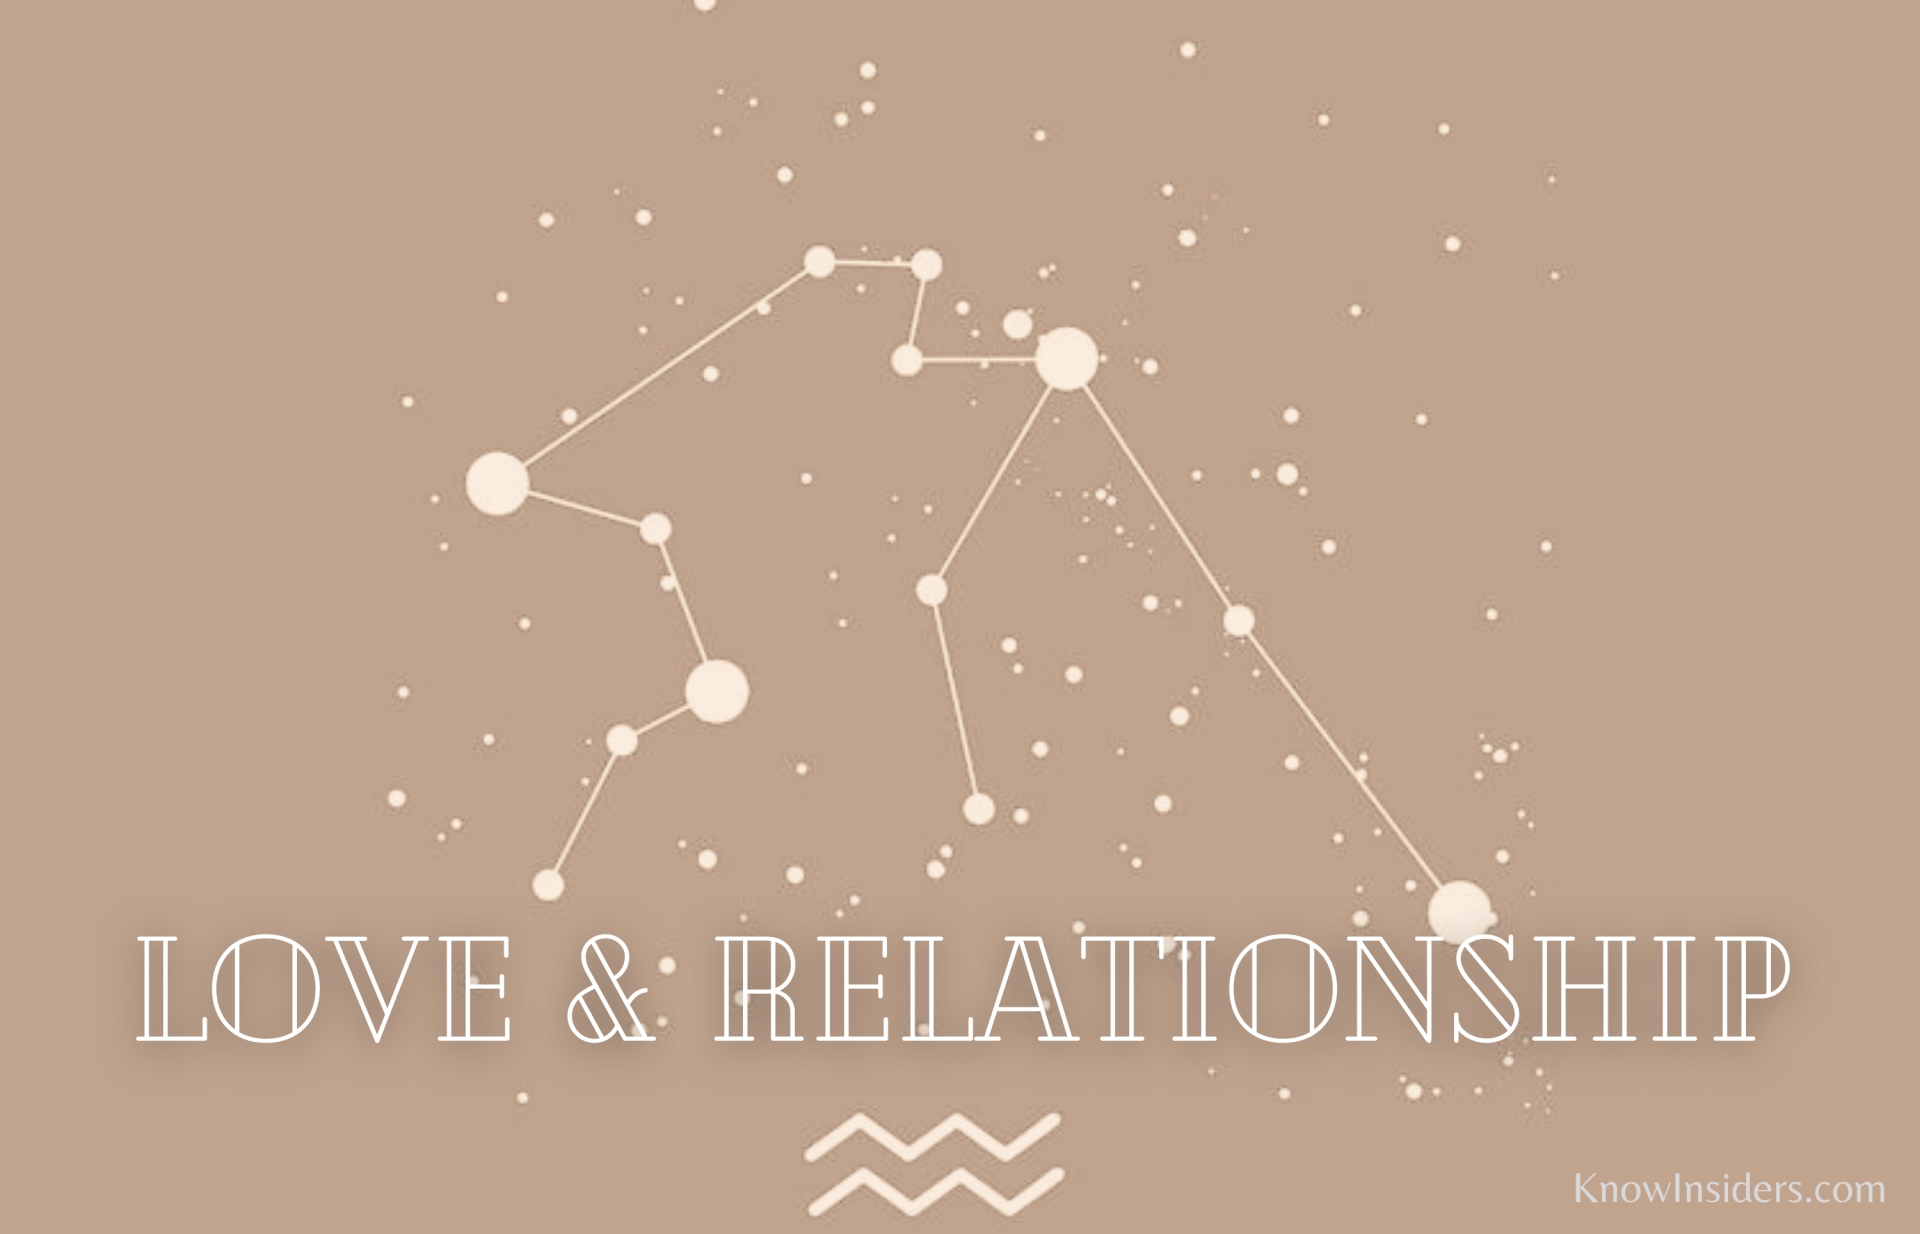 AQUARIUS Horoscope: Astrological Prediction for Love, Family and Relationship